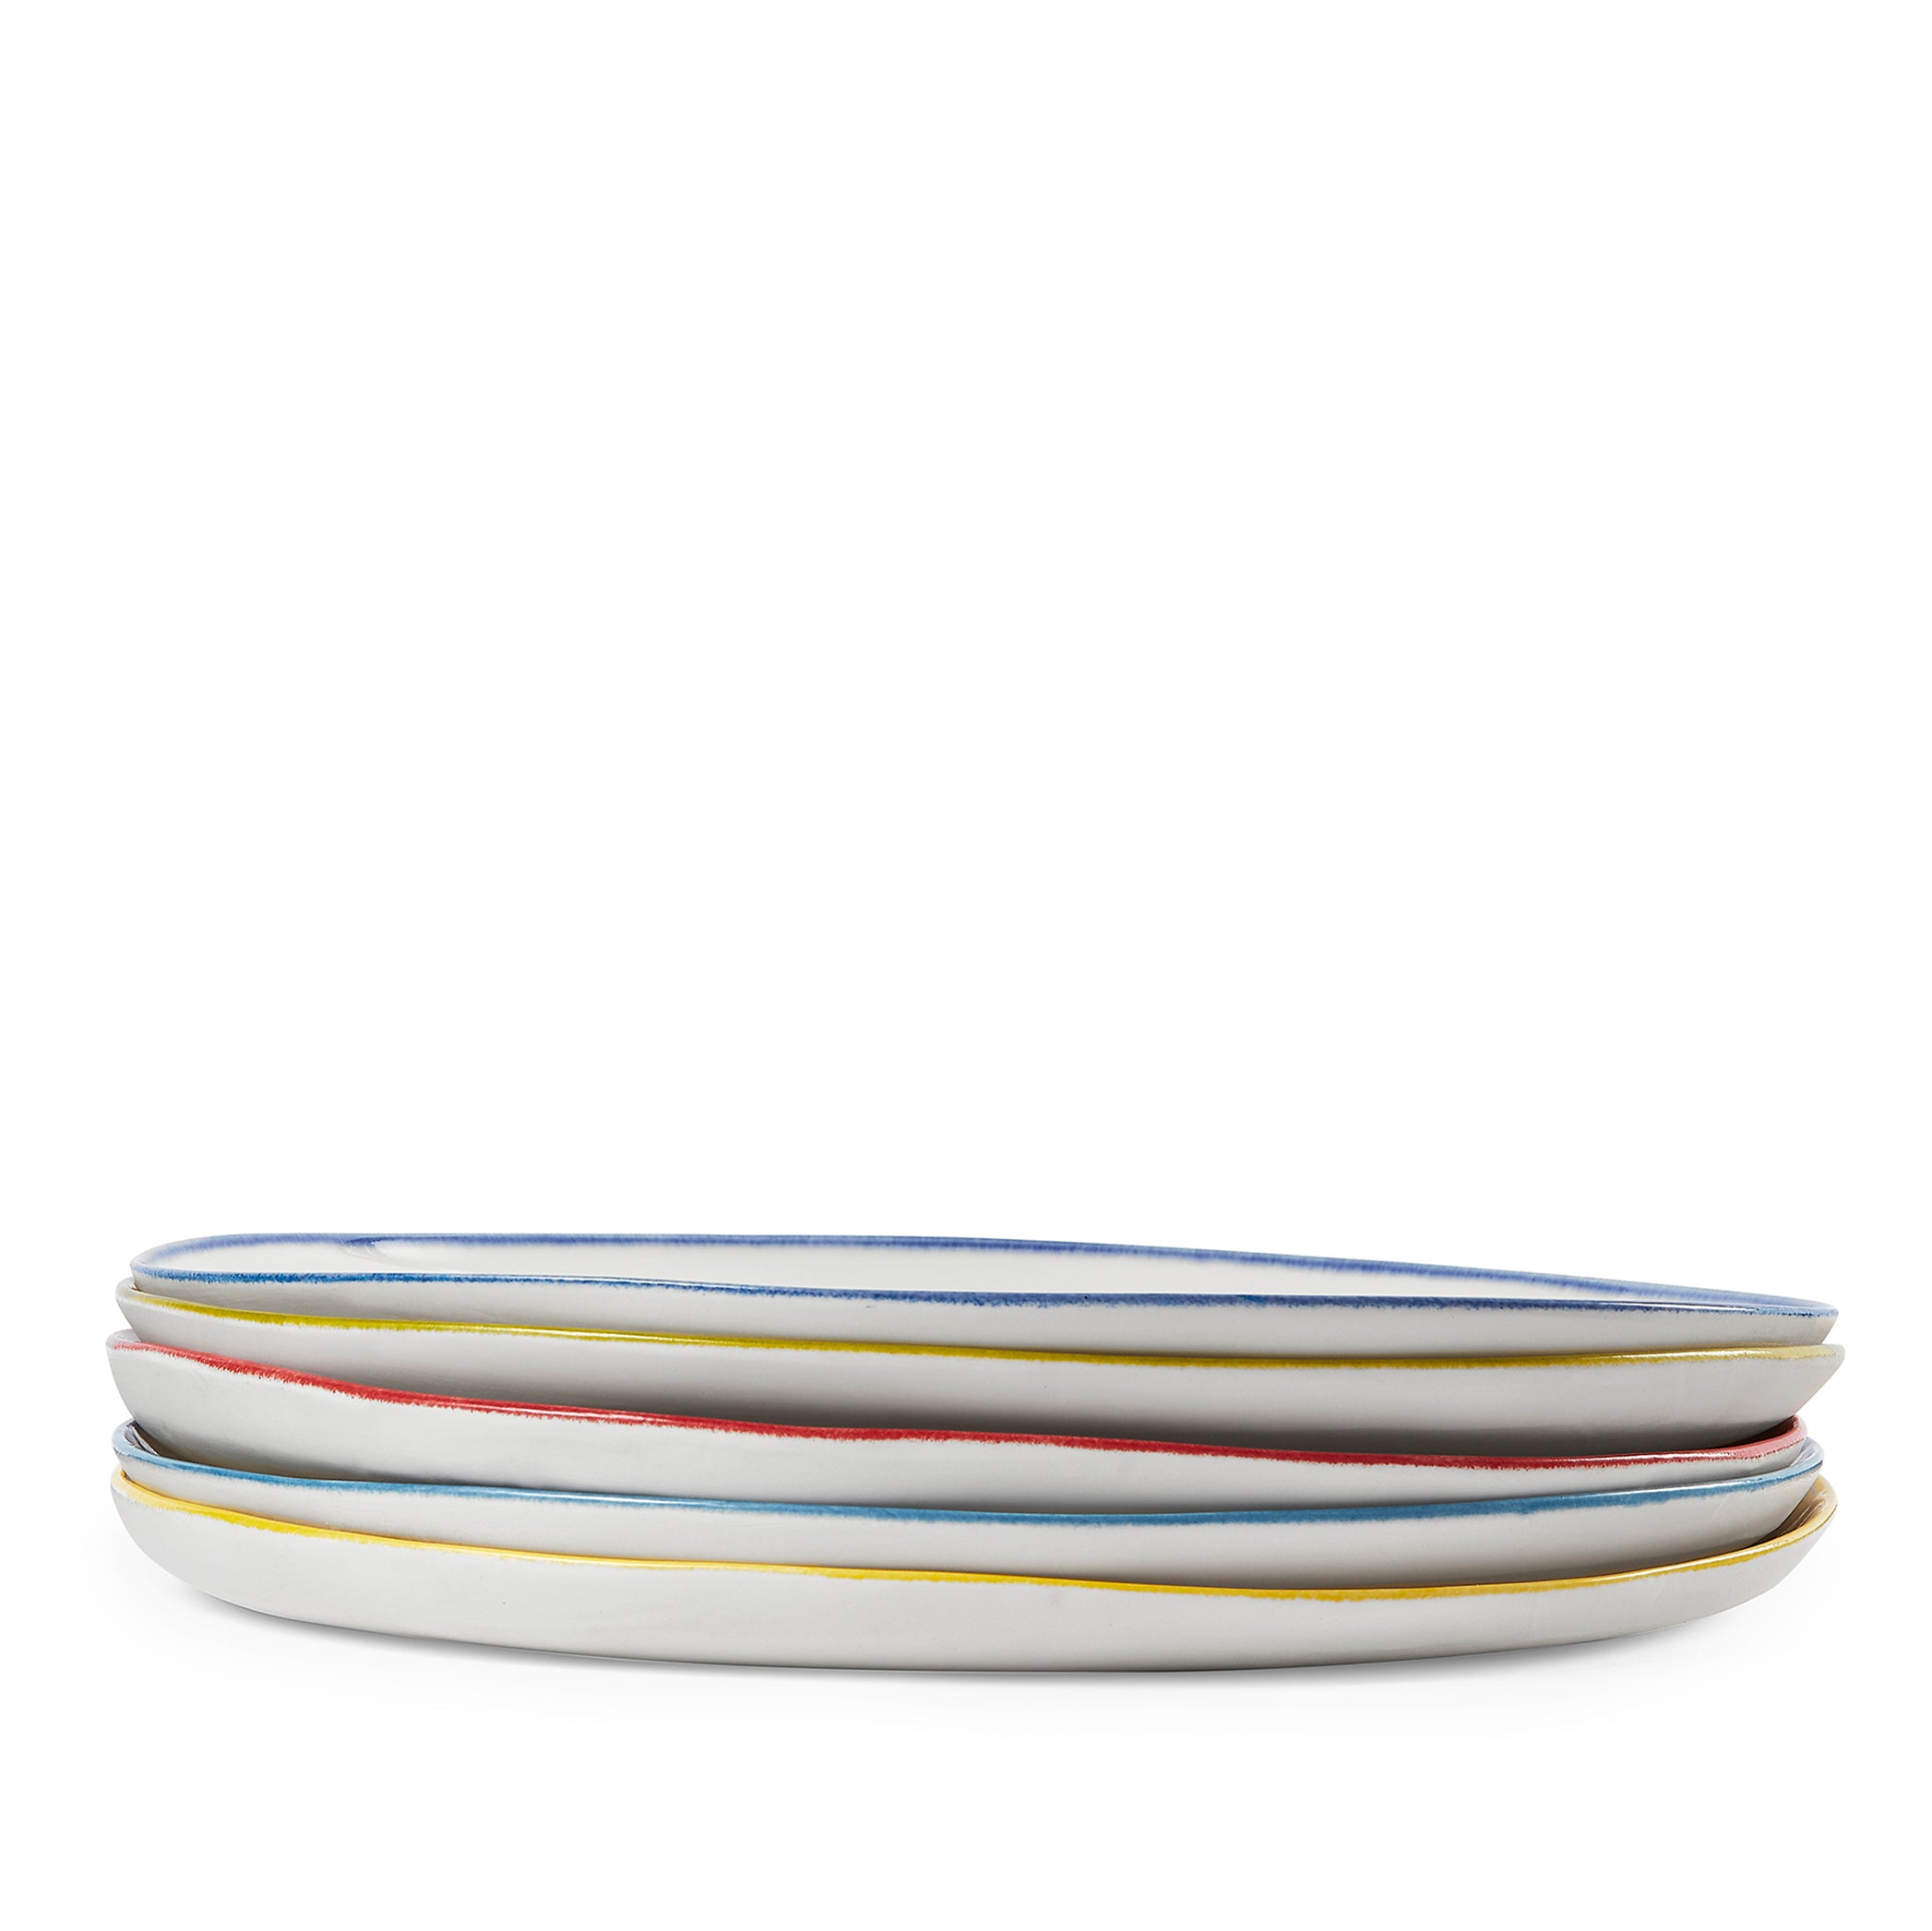 Made to Order - Summerill & Bishop Handmade 31cm Porcelain Dinner Plate with Yellow Rim